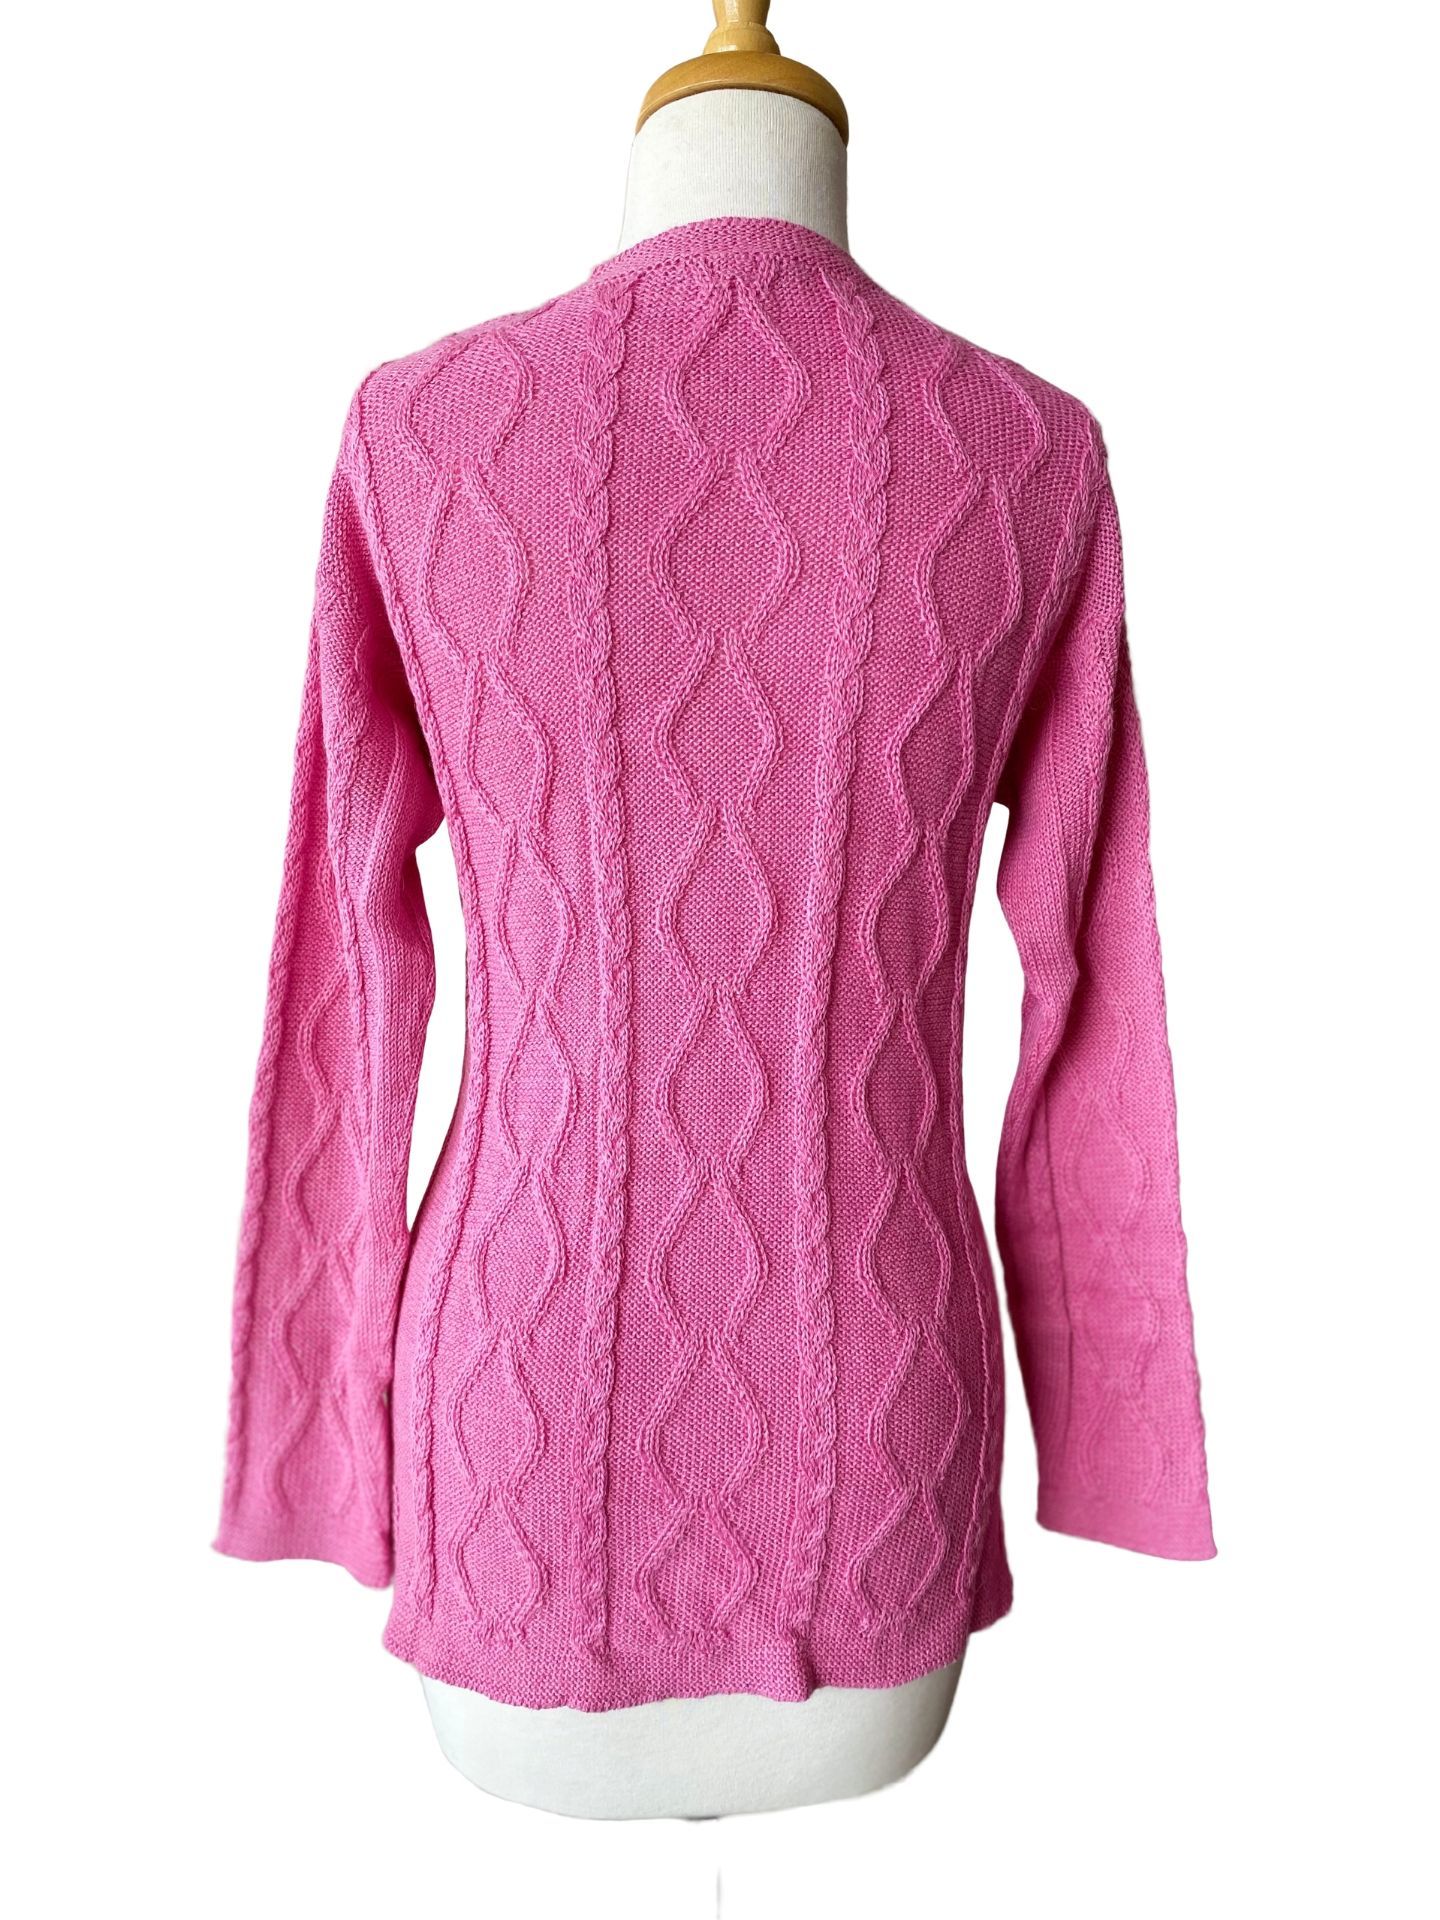 Hand Knitted Cable Sweater - Pink - 2